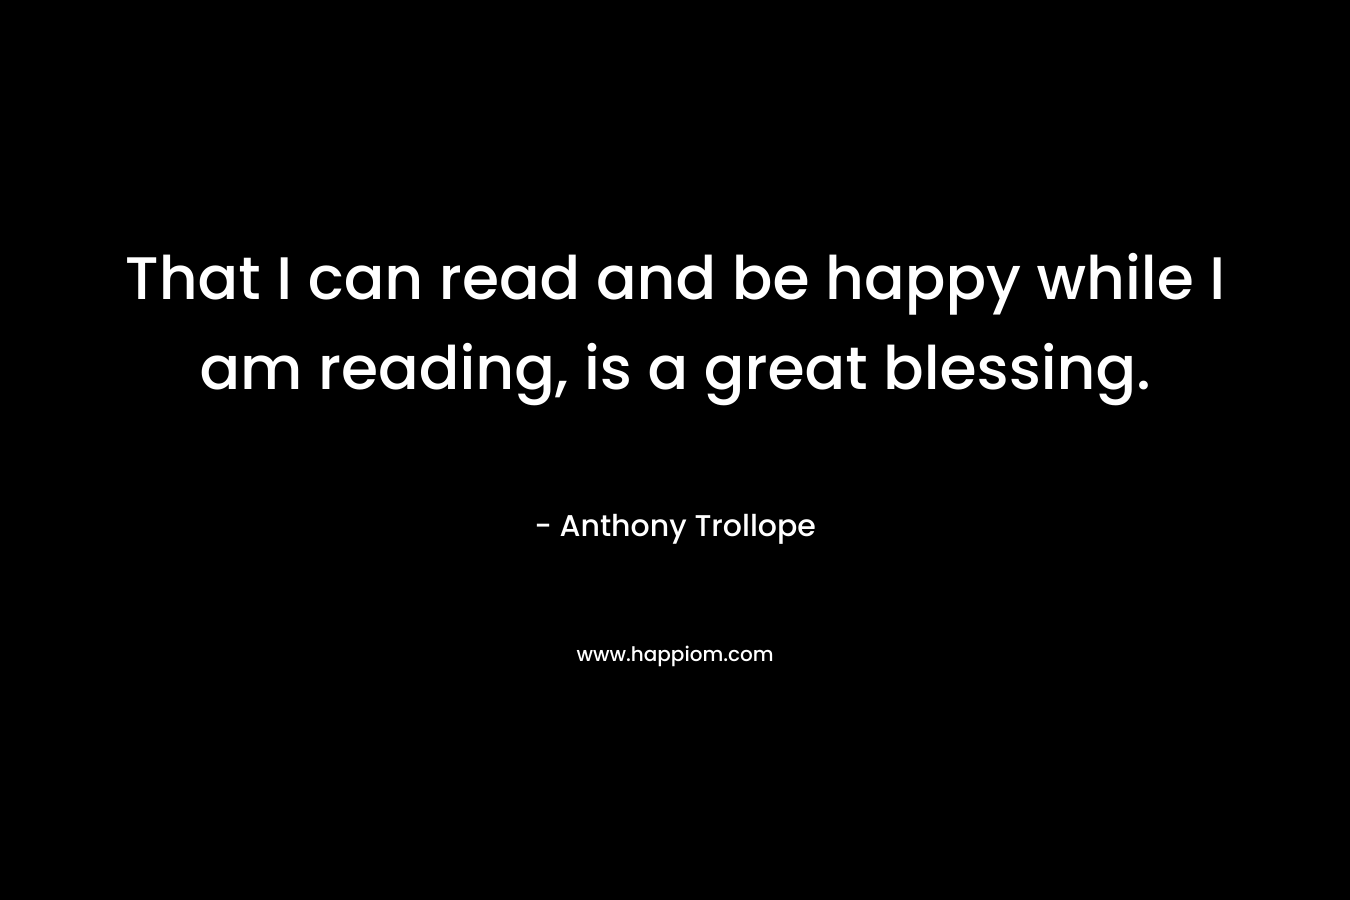 That I can read and be happy while I am reading, is a great blessing. – Anthony Trollope